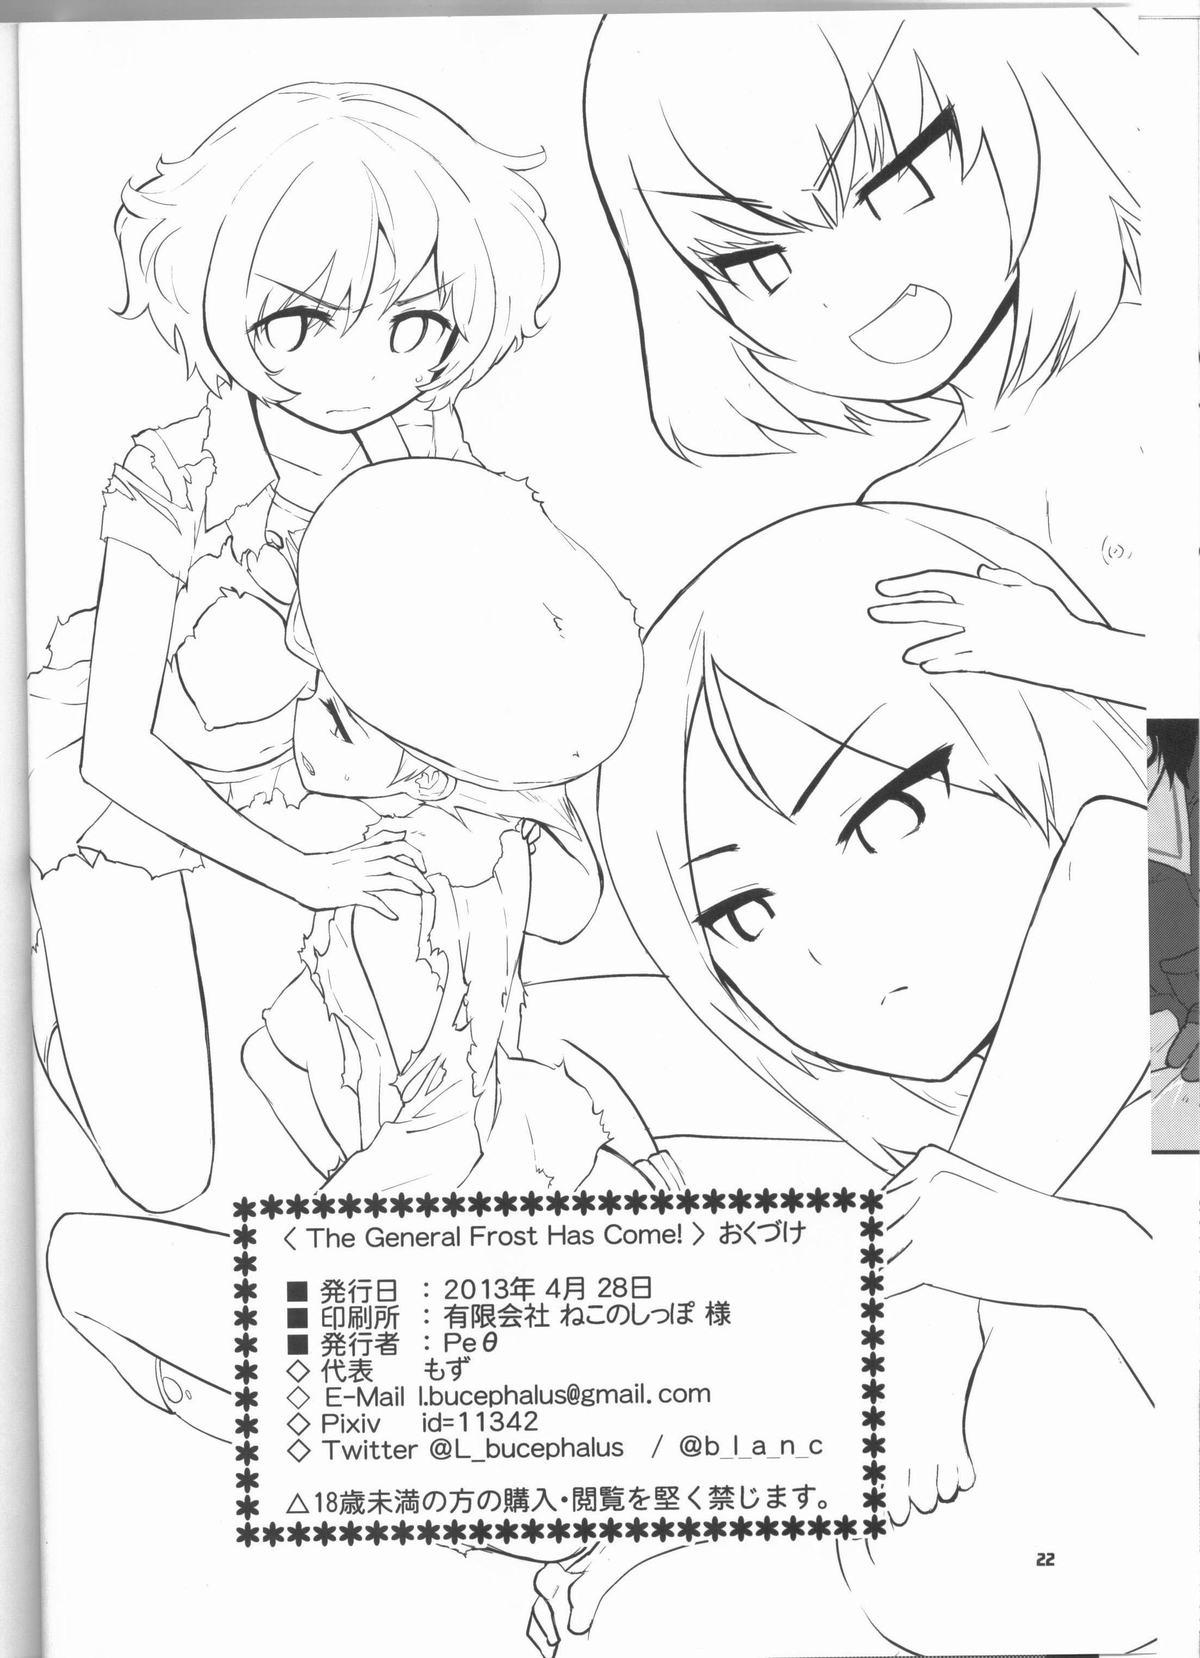 Romantic The General Frost Has Come! - Girls und panzer Sex Toy - Page 21